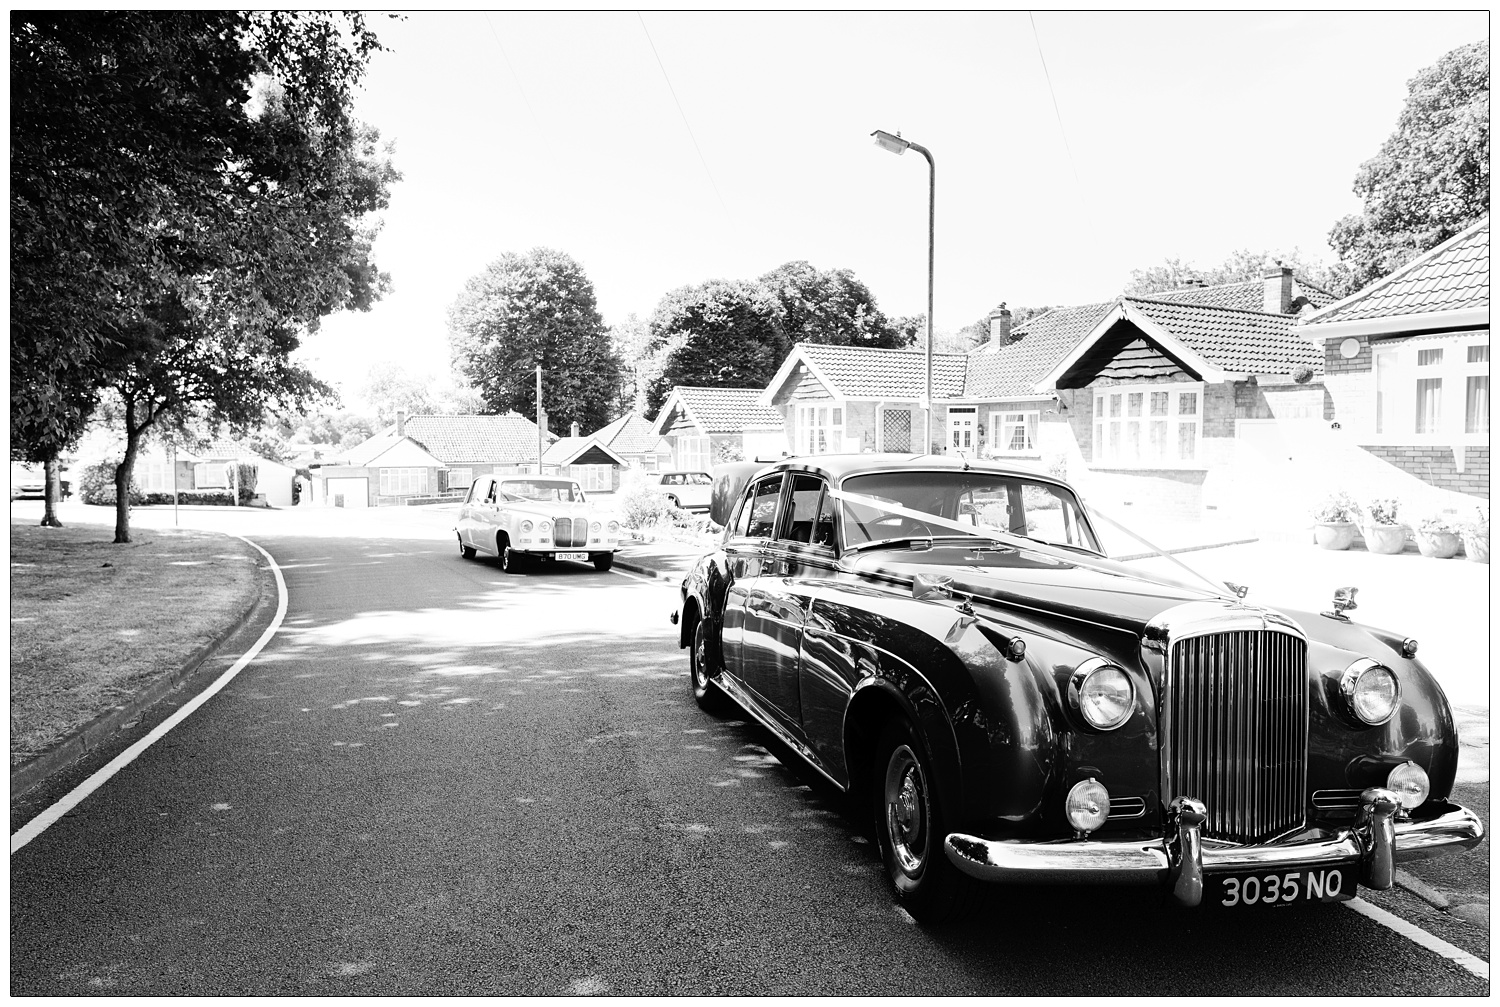 A Bentley dressed for a wedding.